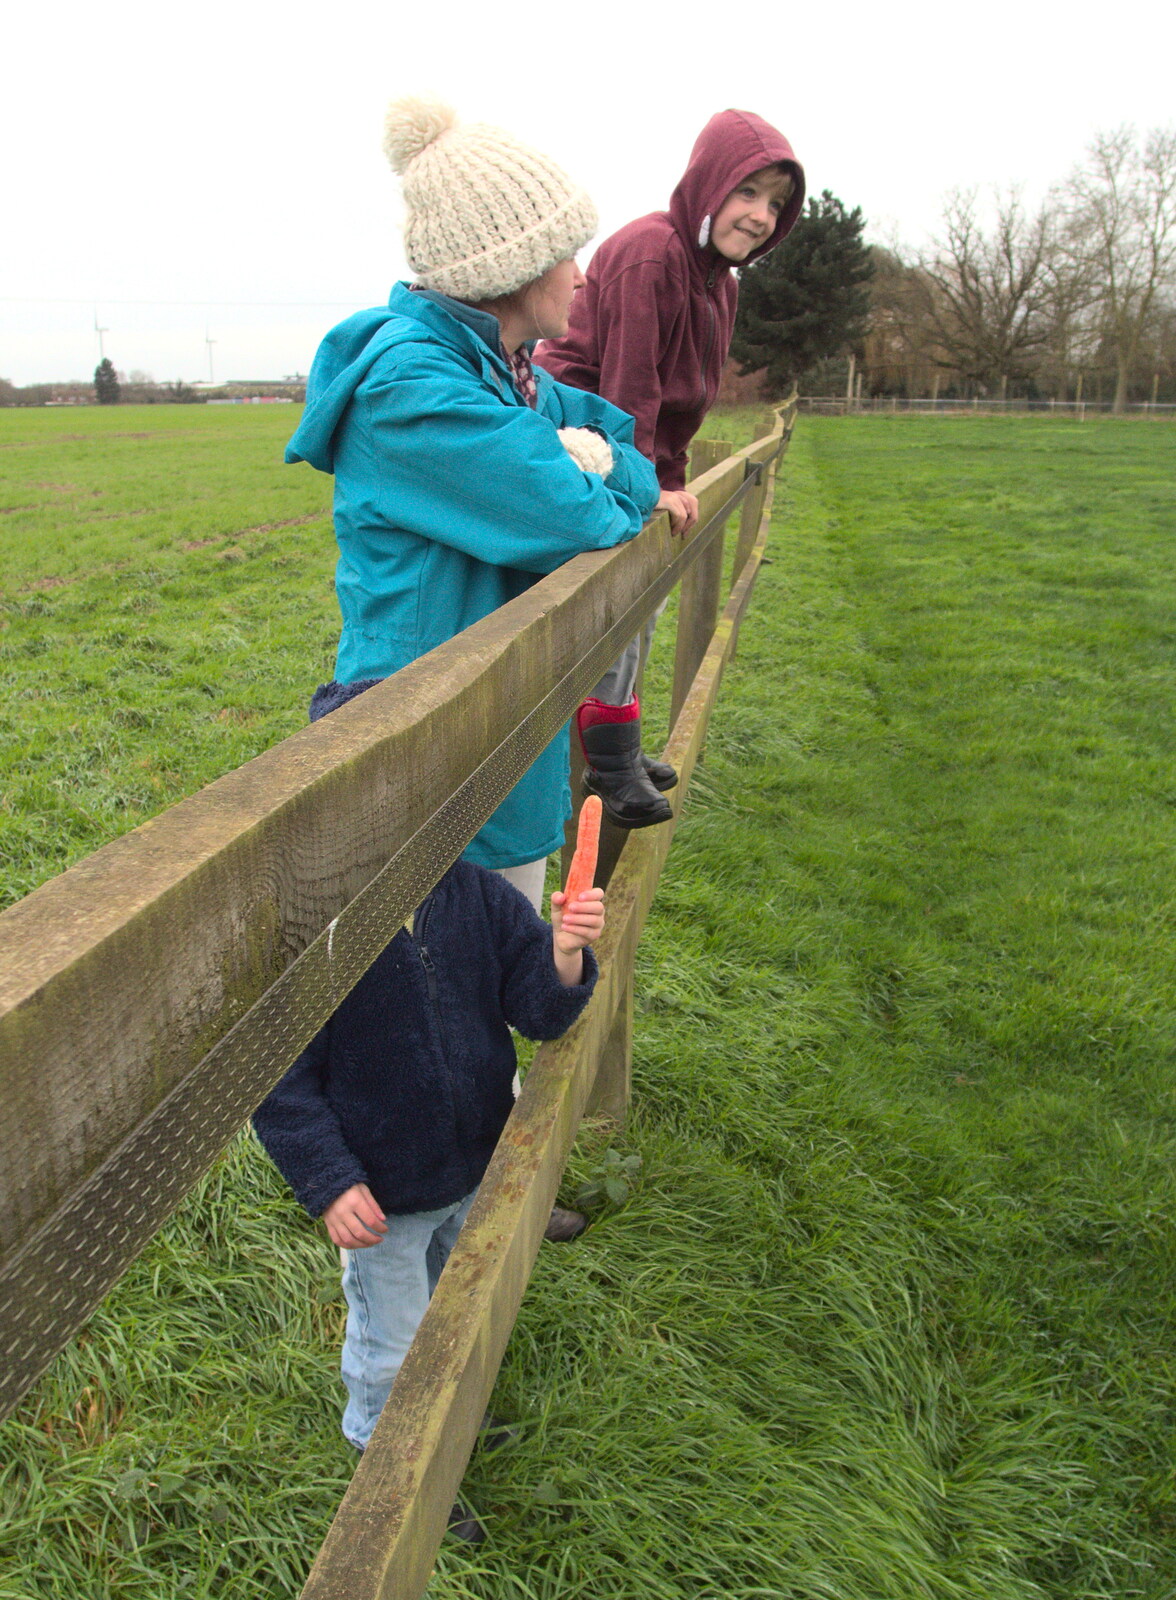 We hang out on Chinner's fence from New Year's Eve With The BBs, The Barrel, Banham, Norfolk - 31st December 2015